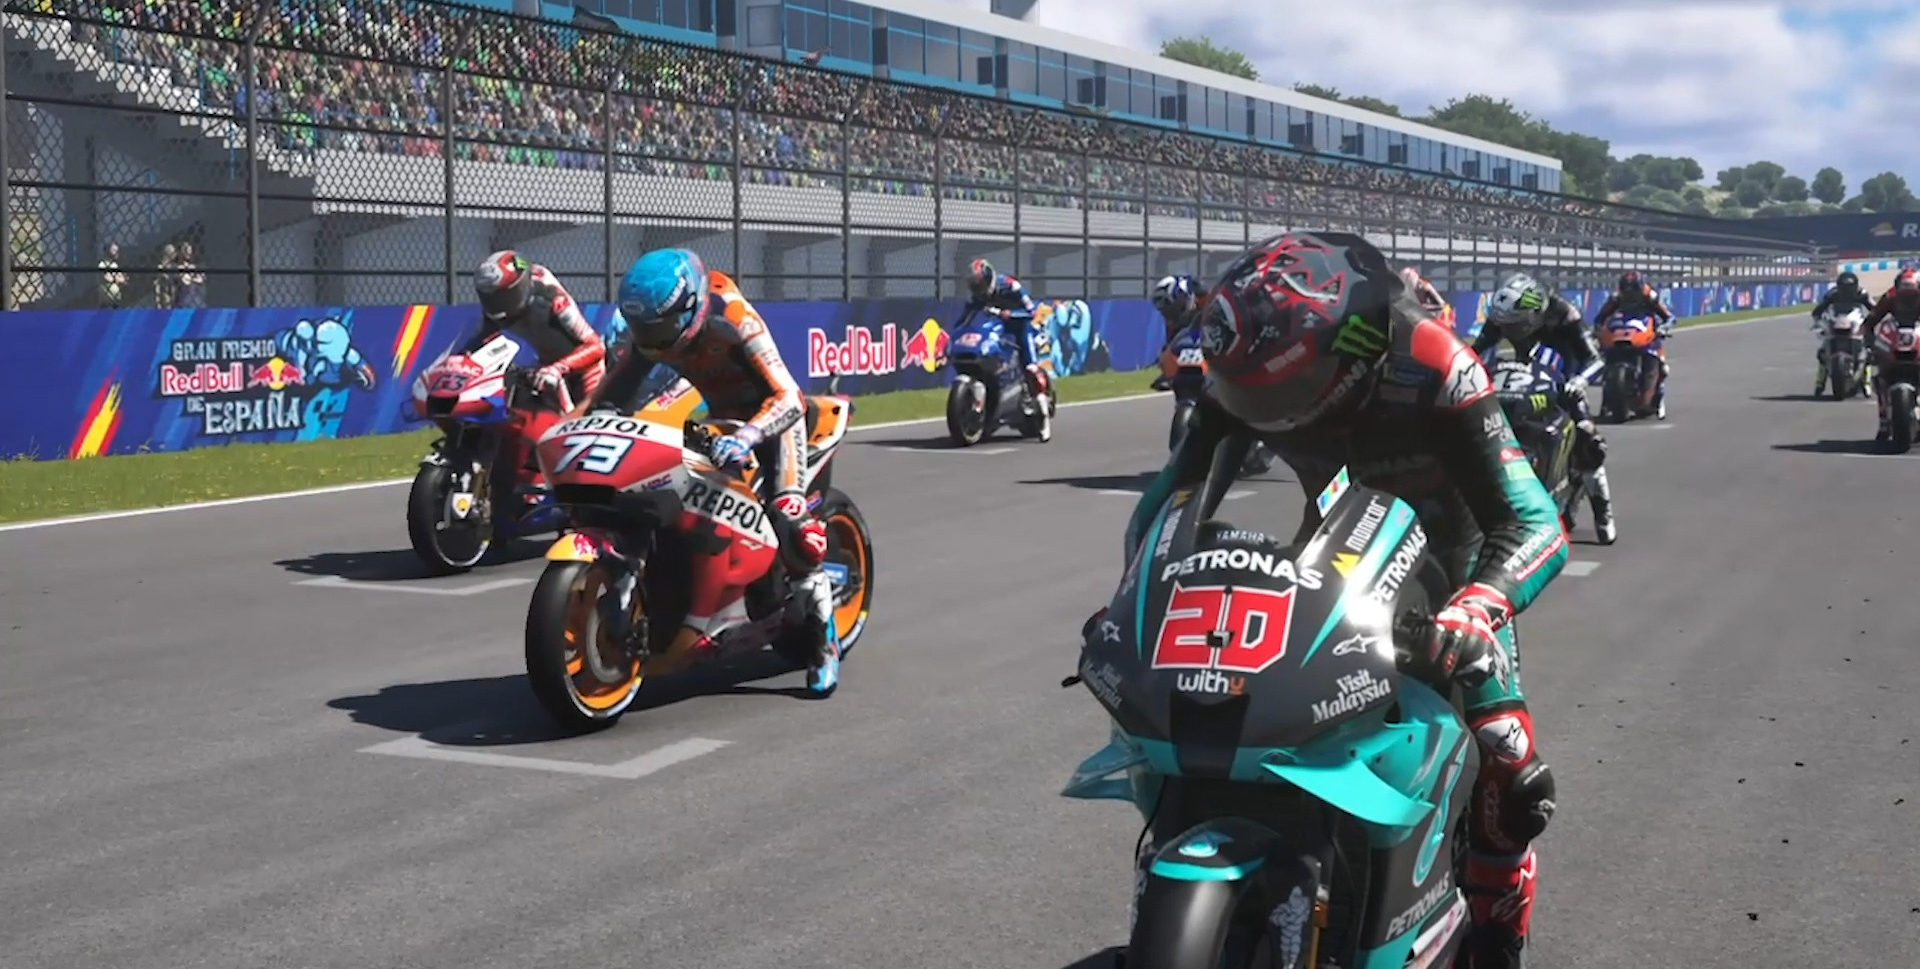 MotoGP set to come to PlayStation 5, Xbox and other platforms in April